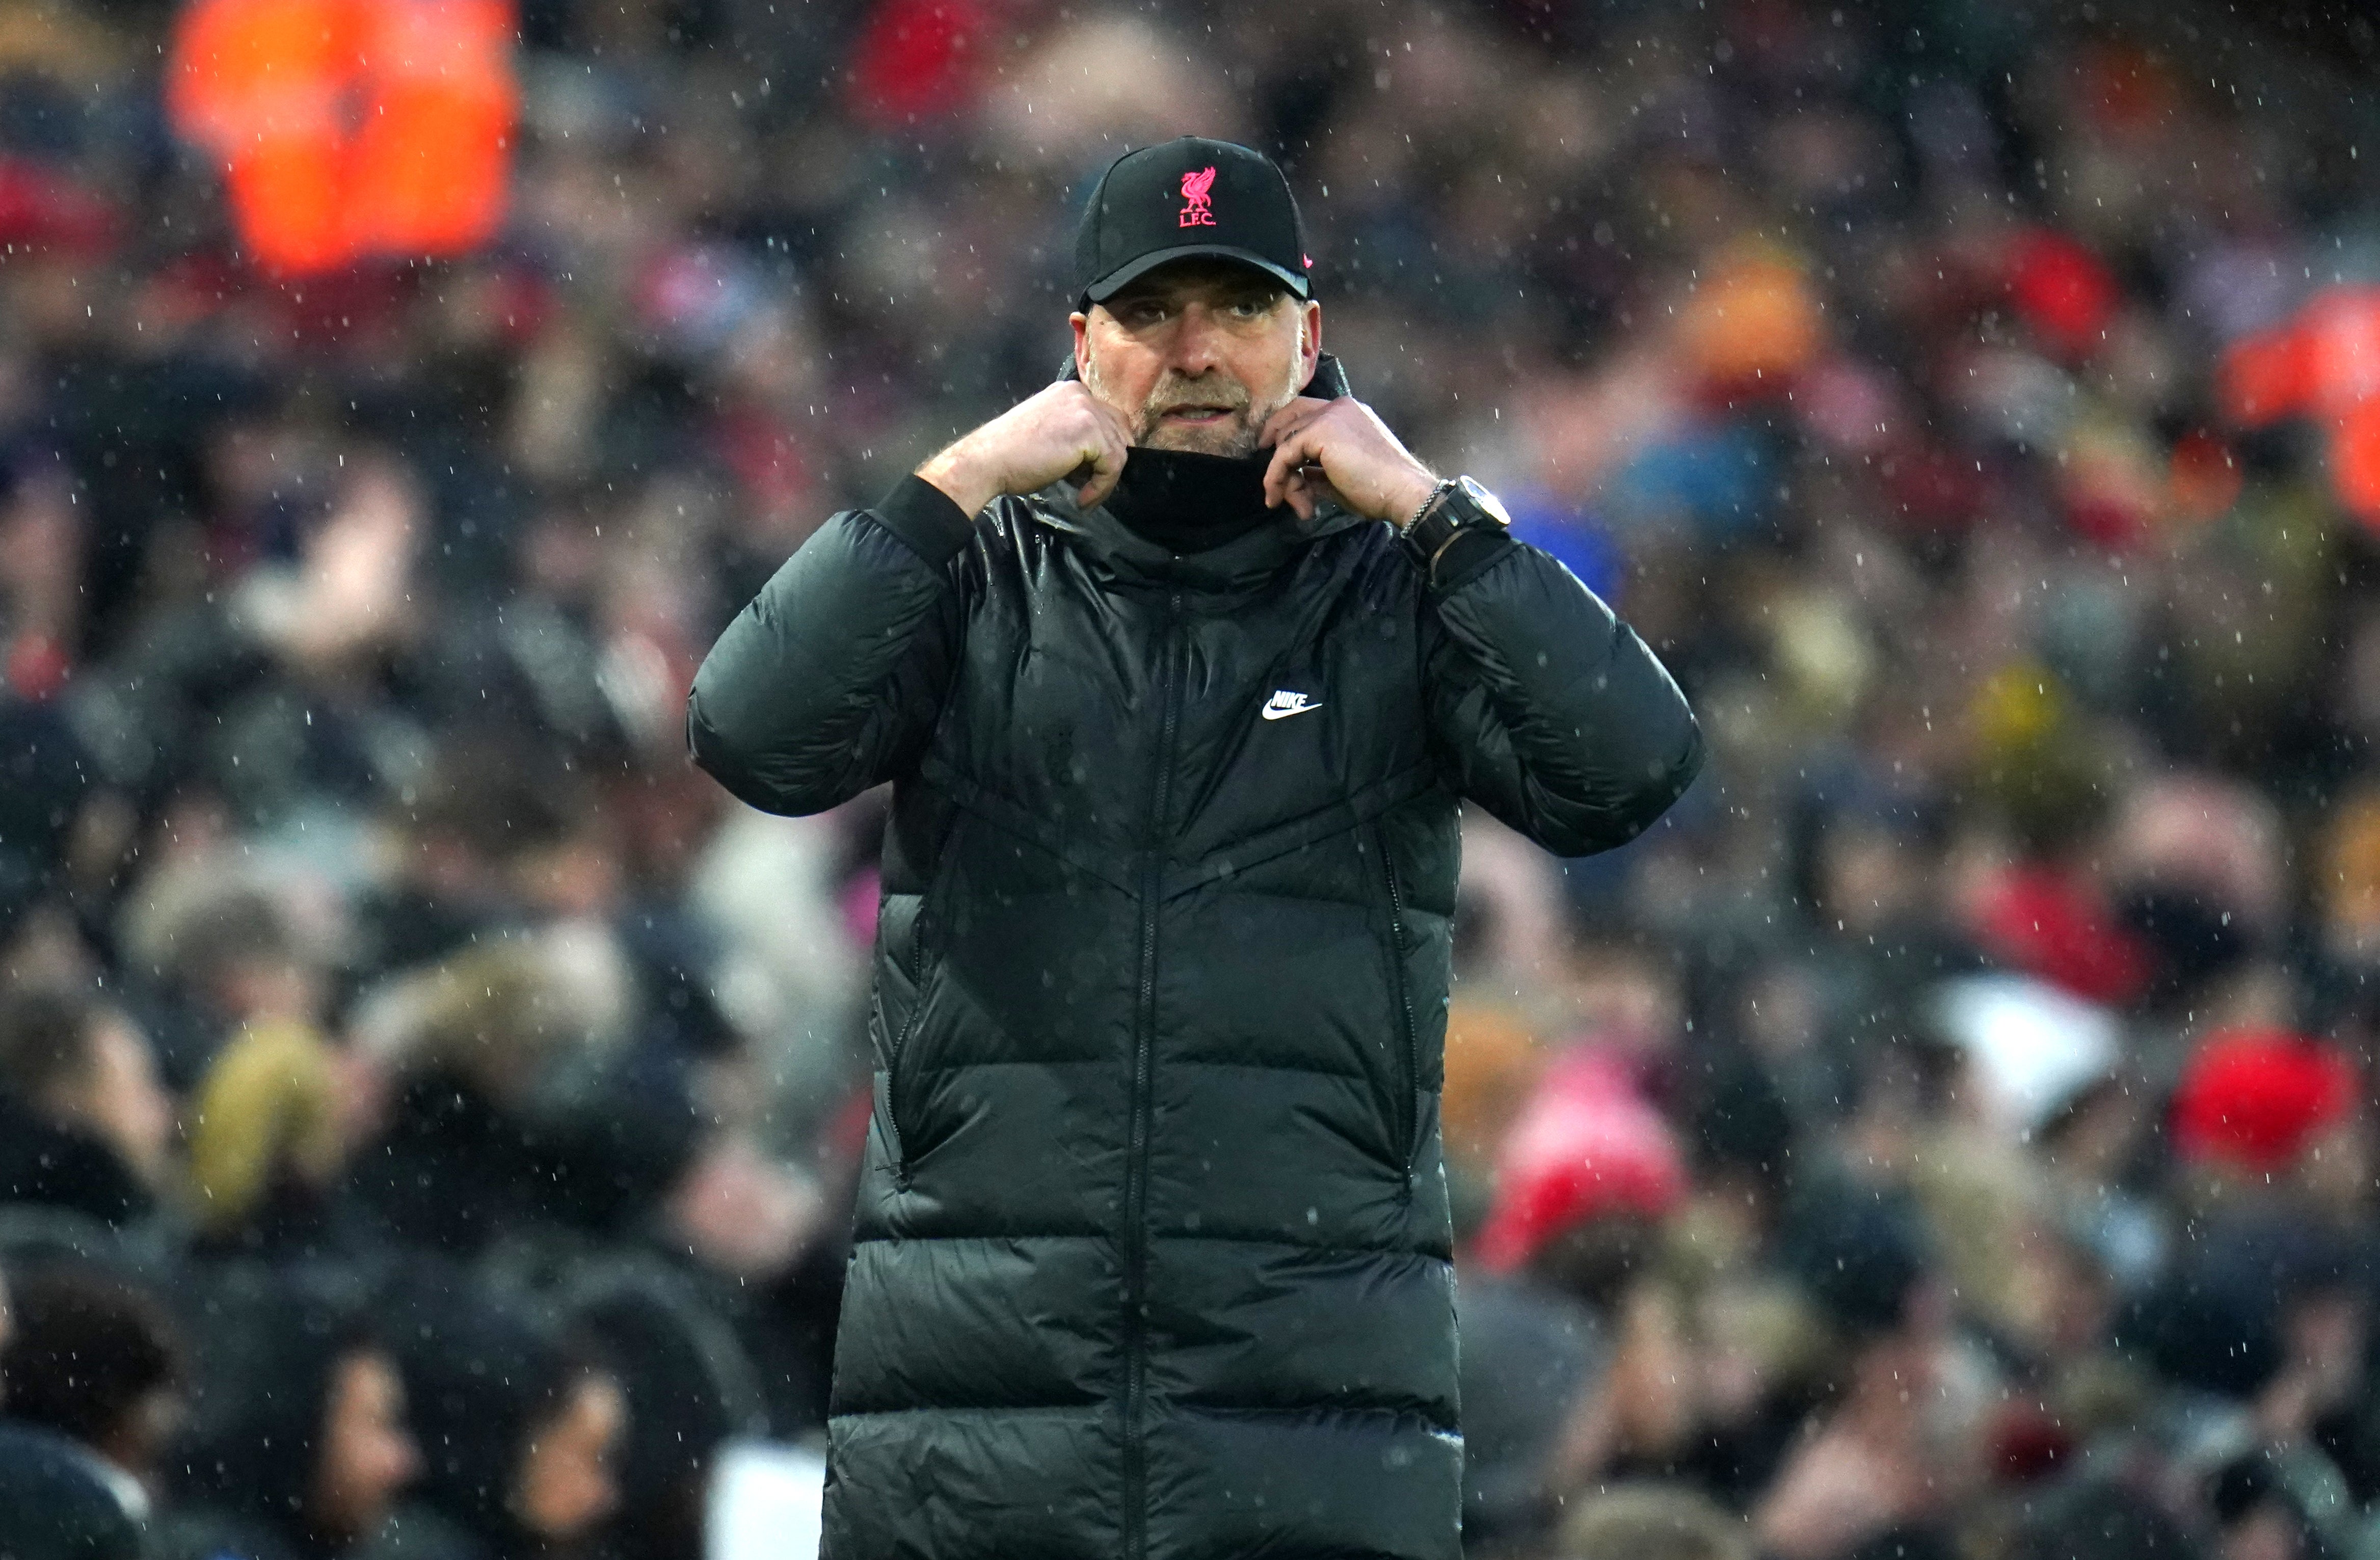 Jurgen Klopp’s (pictured) Liverpool saw preparations for the game suffer disruption after Thiago Alcantara tested positive (Nick Potts/PA)